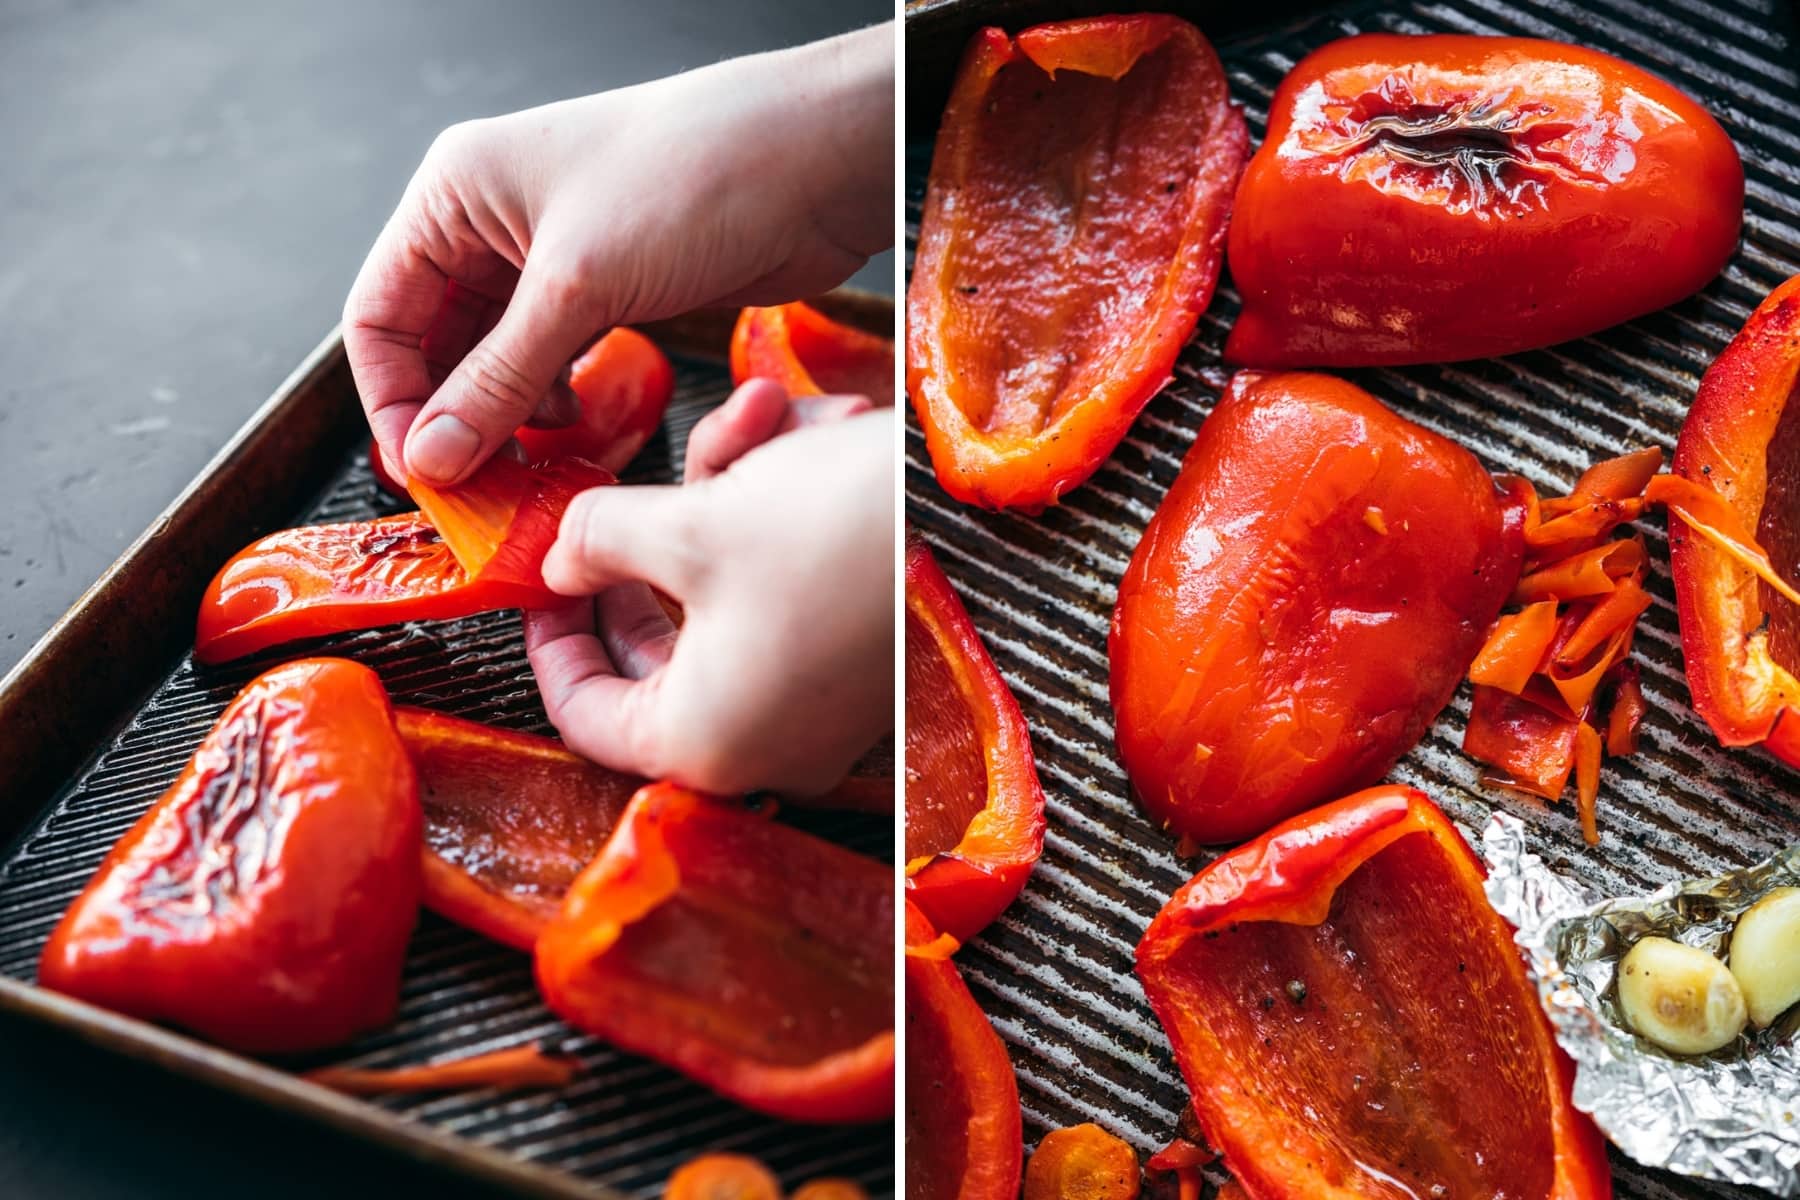 on the left: peeling skin off of roasted red pepper. on the right: roasted red peppers on sheet pan. 